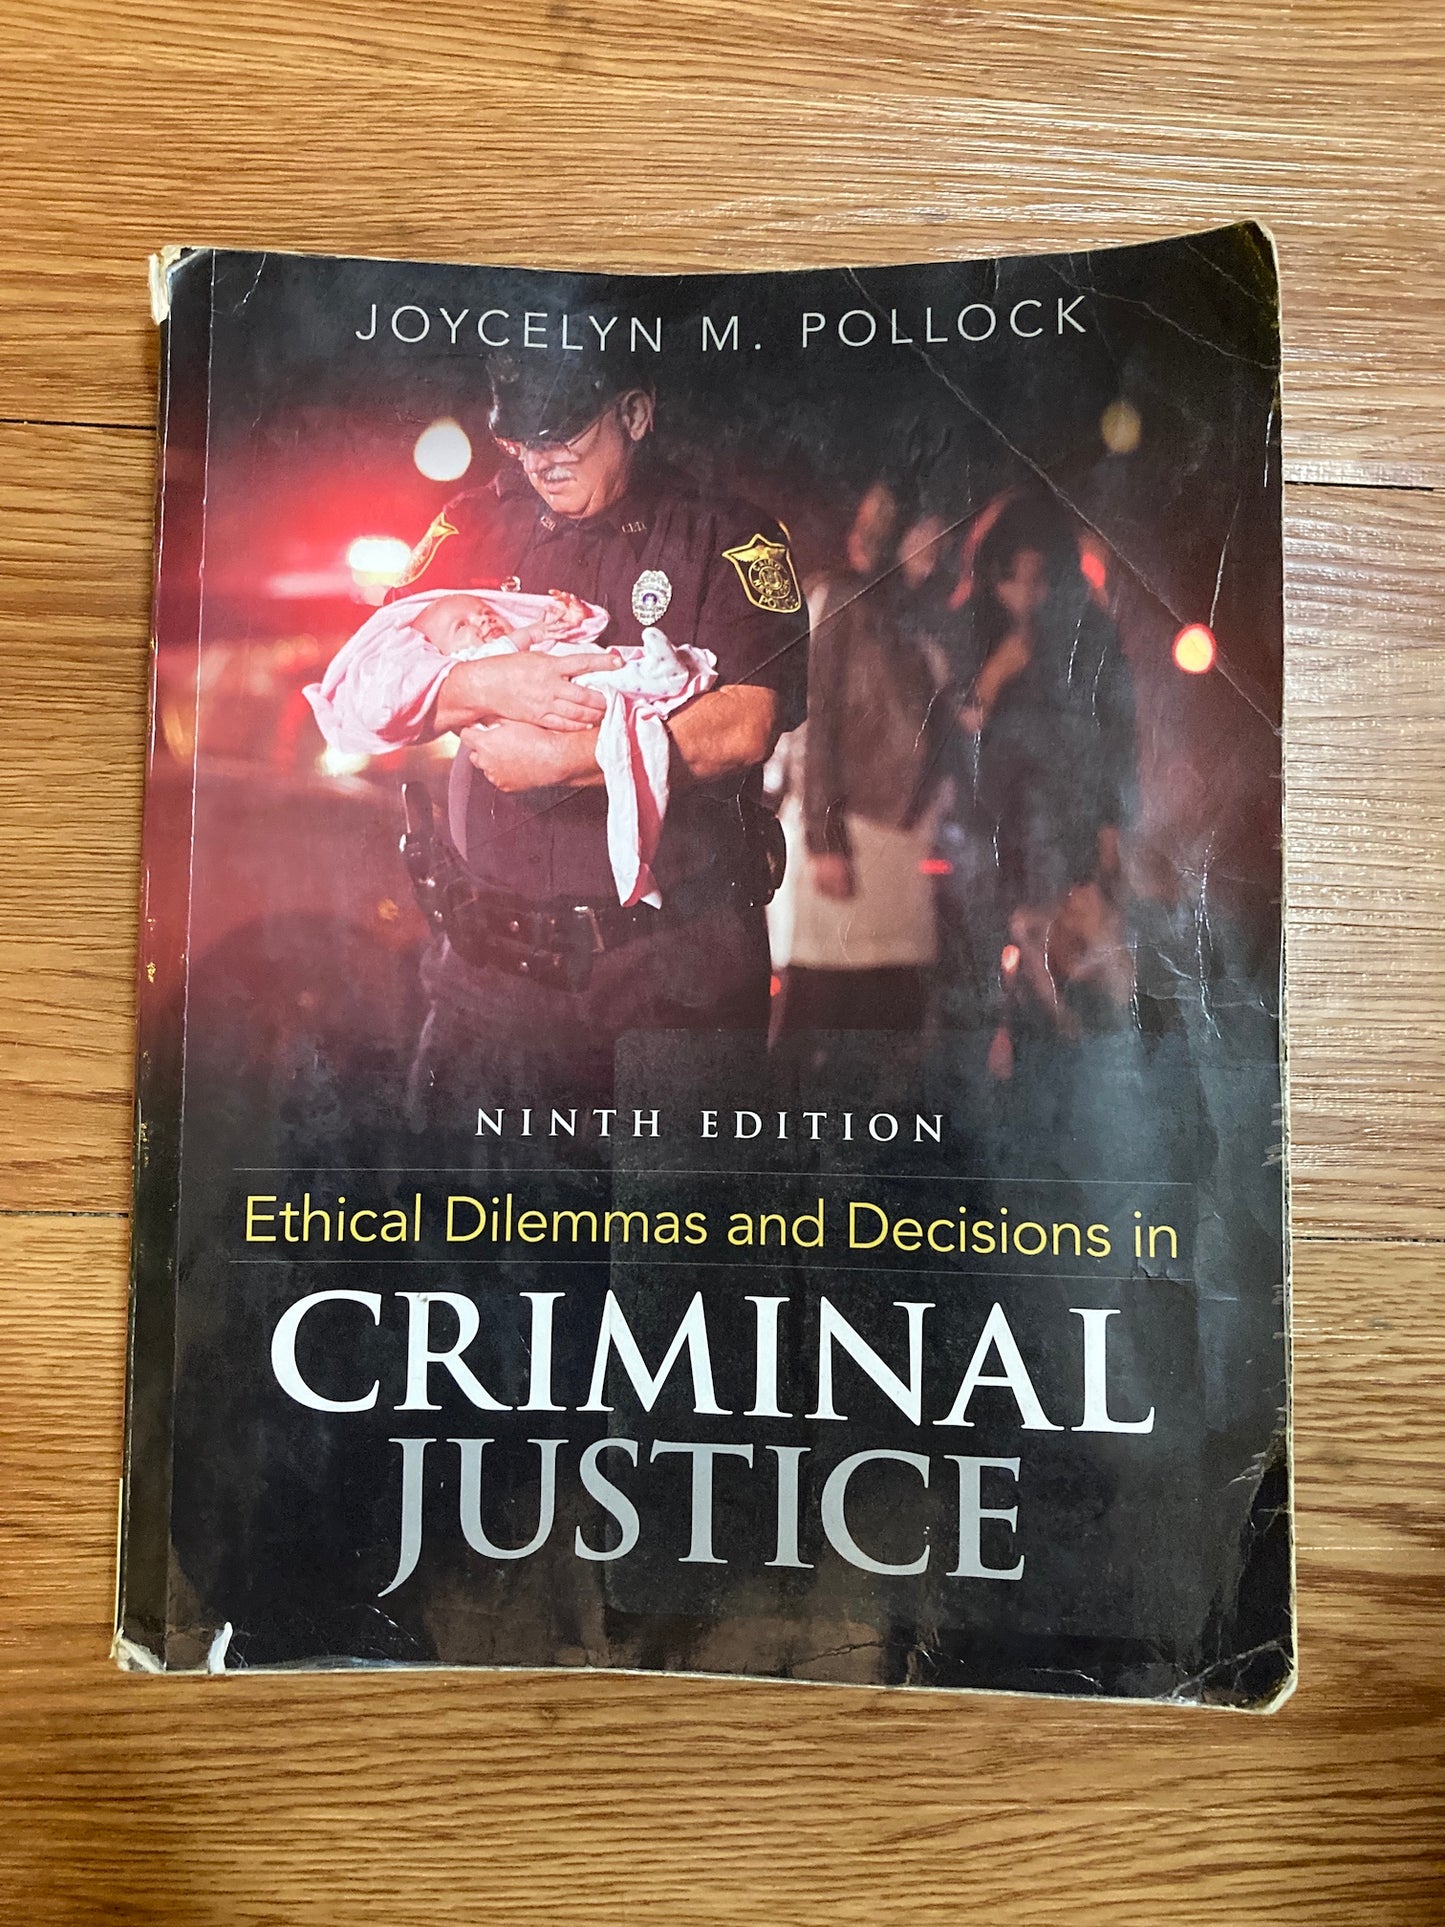 Ethical Dilemmas and Decisions in Criminal Justice (9th Edition)